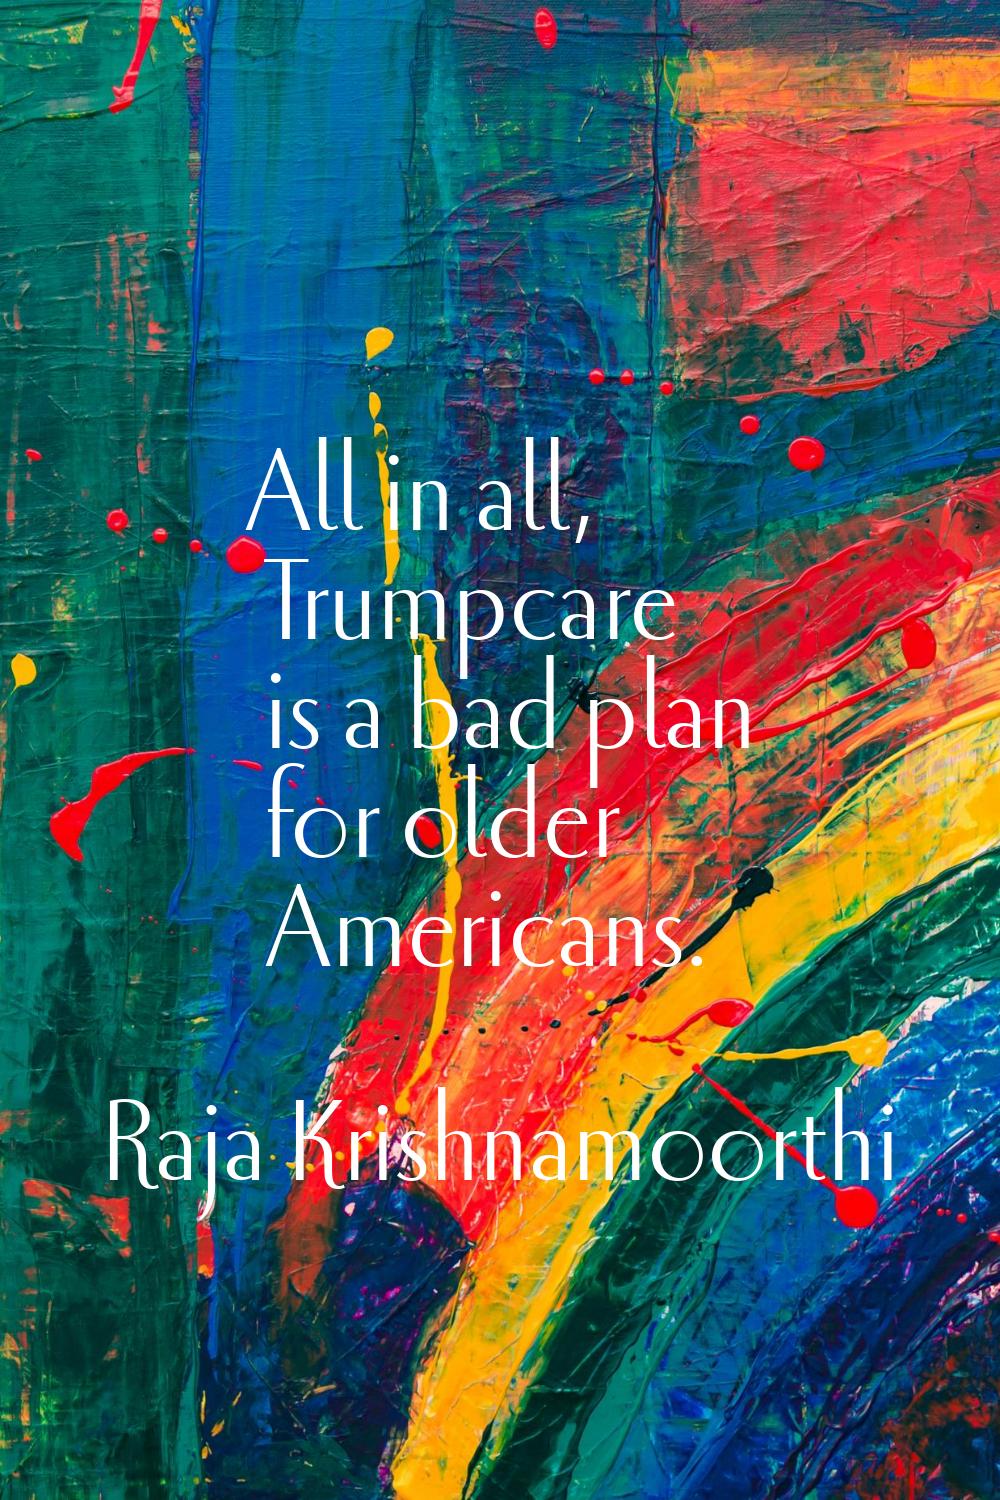 All in all, Trumpcare is a bad plan for older Americans.